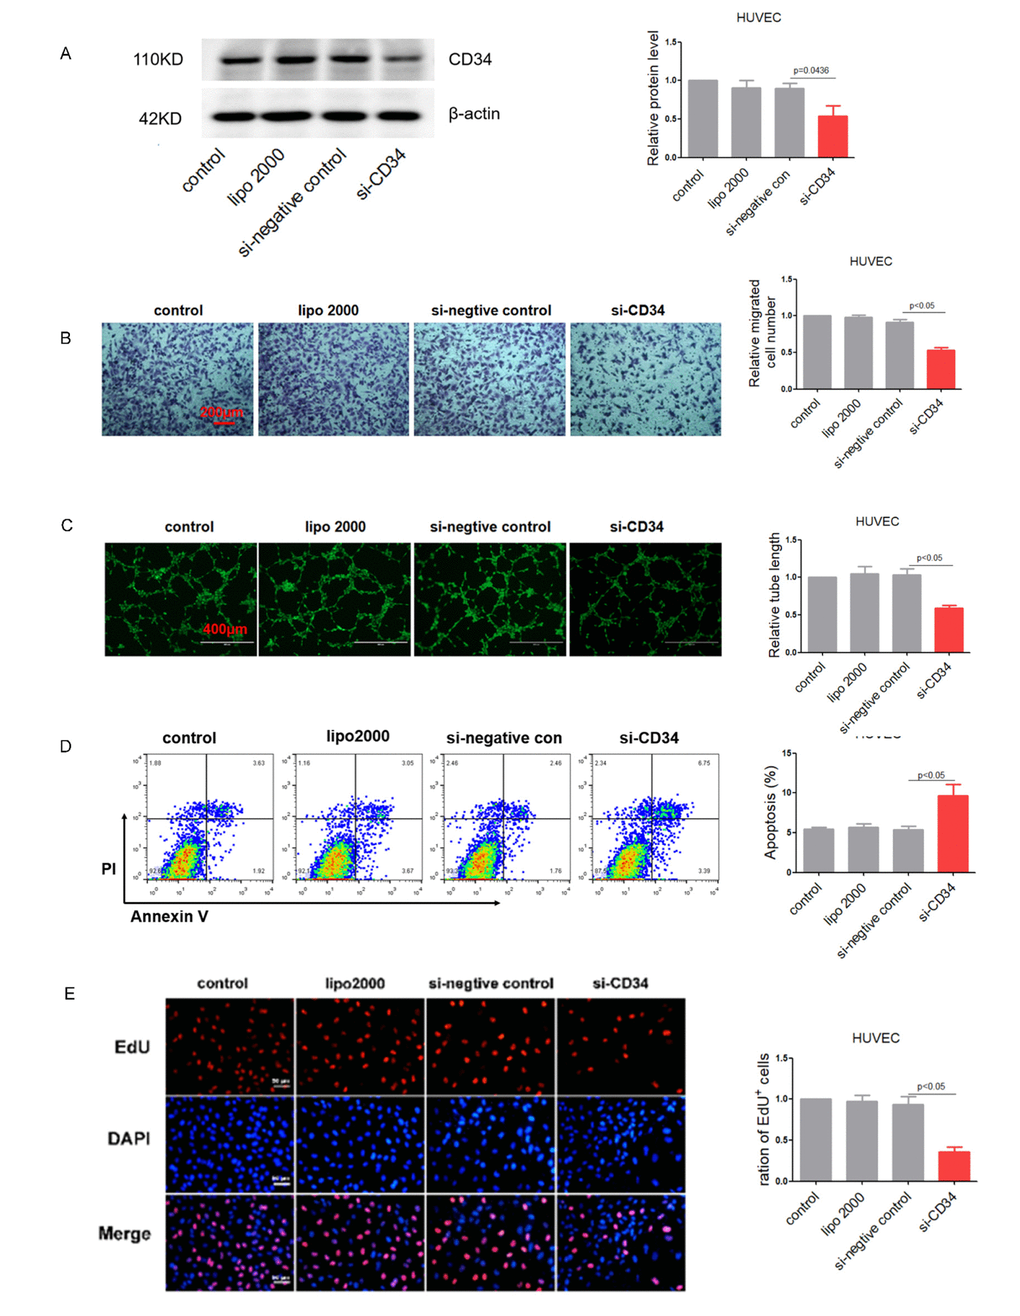 Down-regulation of CD34 impairs endothelium function in vitro. (A) CD34 protein levels in treated HUVEC cells detected by Western blotting. (B) Migration evaluated by transwell experiment in HUVEC cells. (C) Tube formation determined on Matrigel in HUVEC cells. (D) Apoptosis measured by Annexin V/PI flow cytometric analysis in HUVEC cells. (E) Proliferation detected by EdU incorporation assays in HUVEC cells. Data are representative of four experiments, n=4. Data are expressed as mean ± SEM.